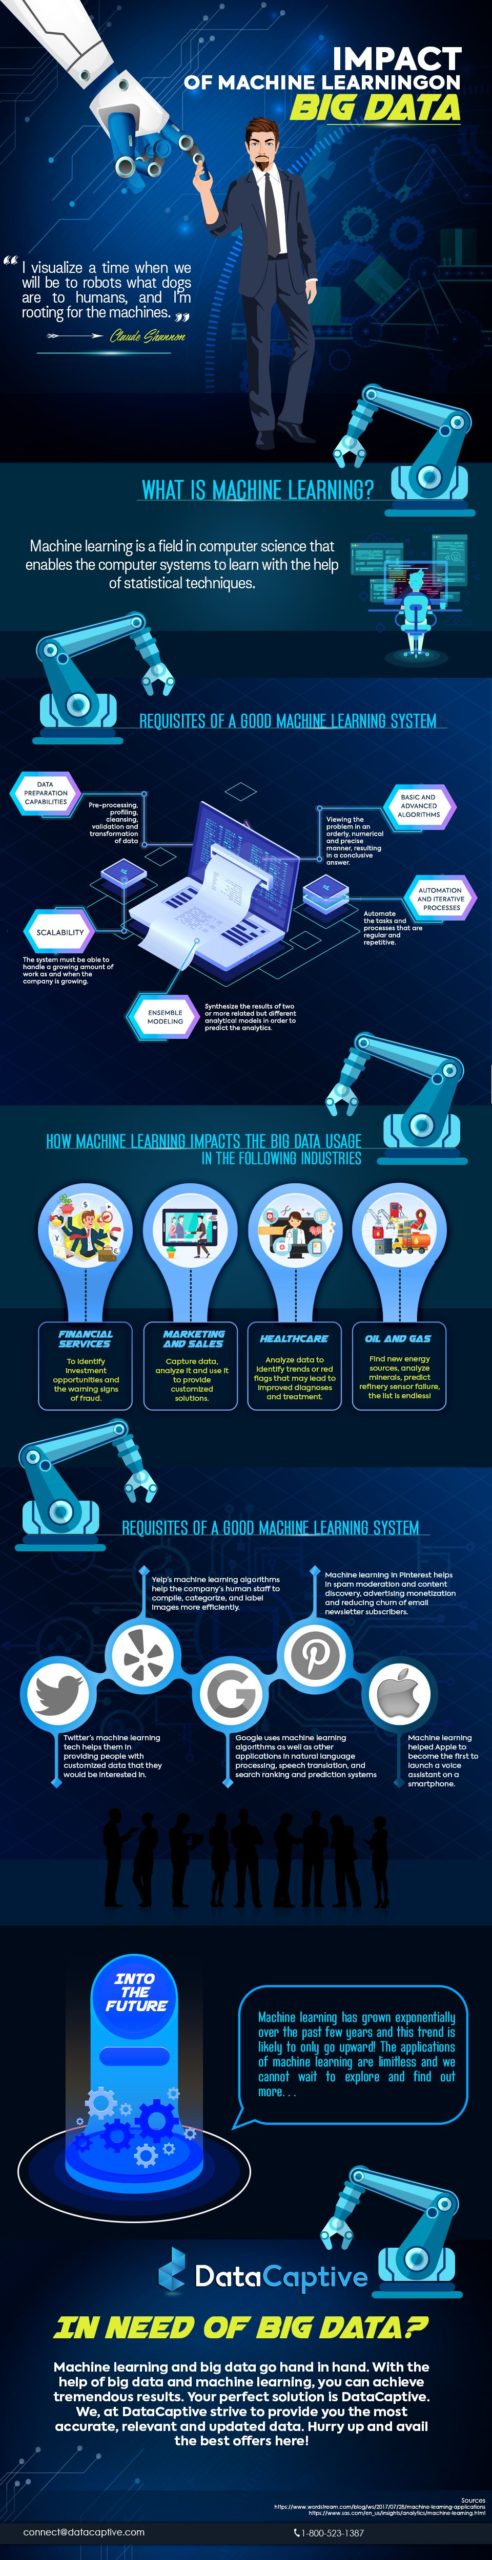 impact of machine learning on big data infographic